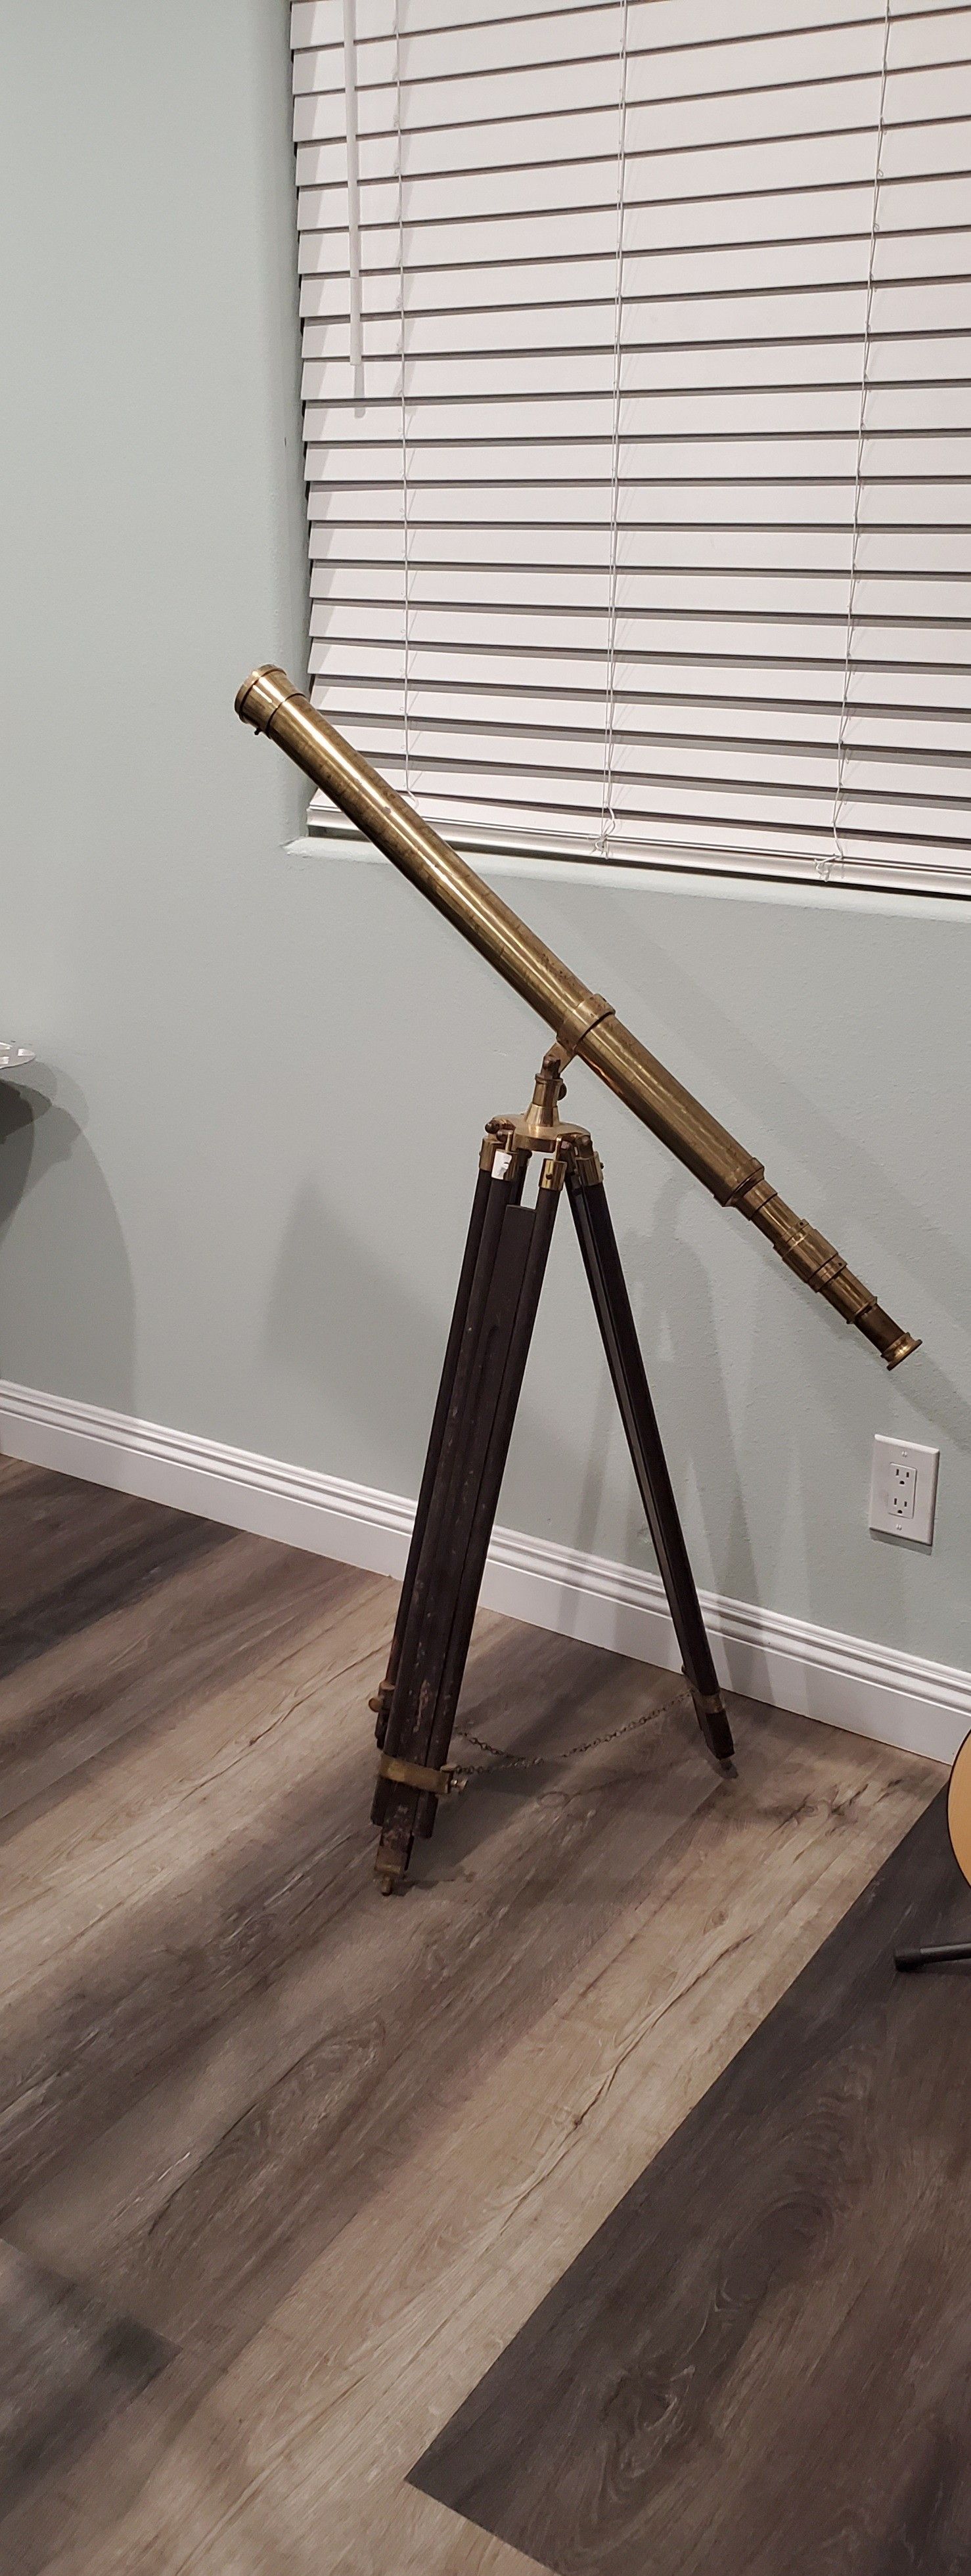 Antique Telescope. Yes, it works just fine!